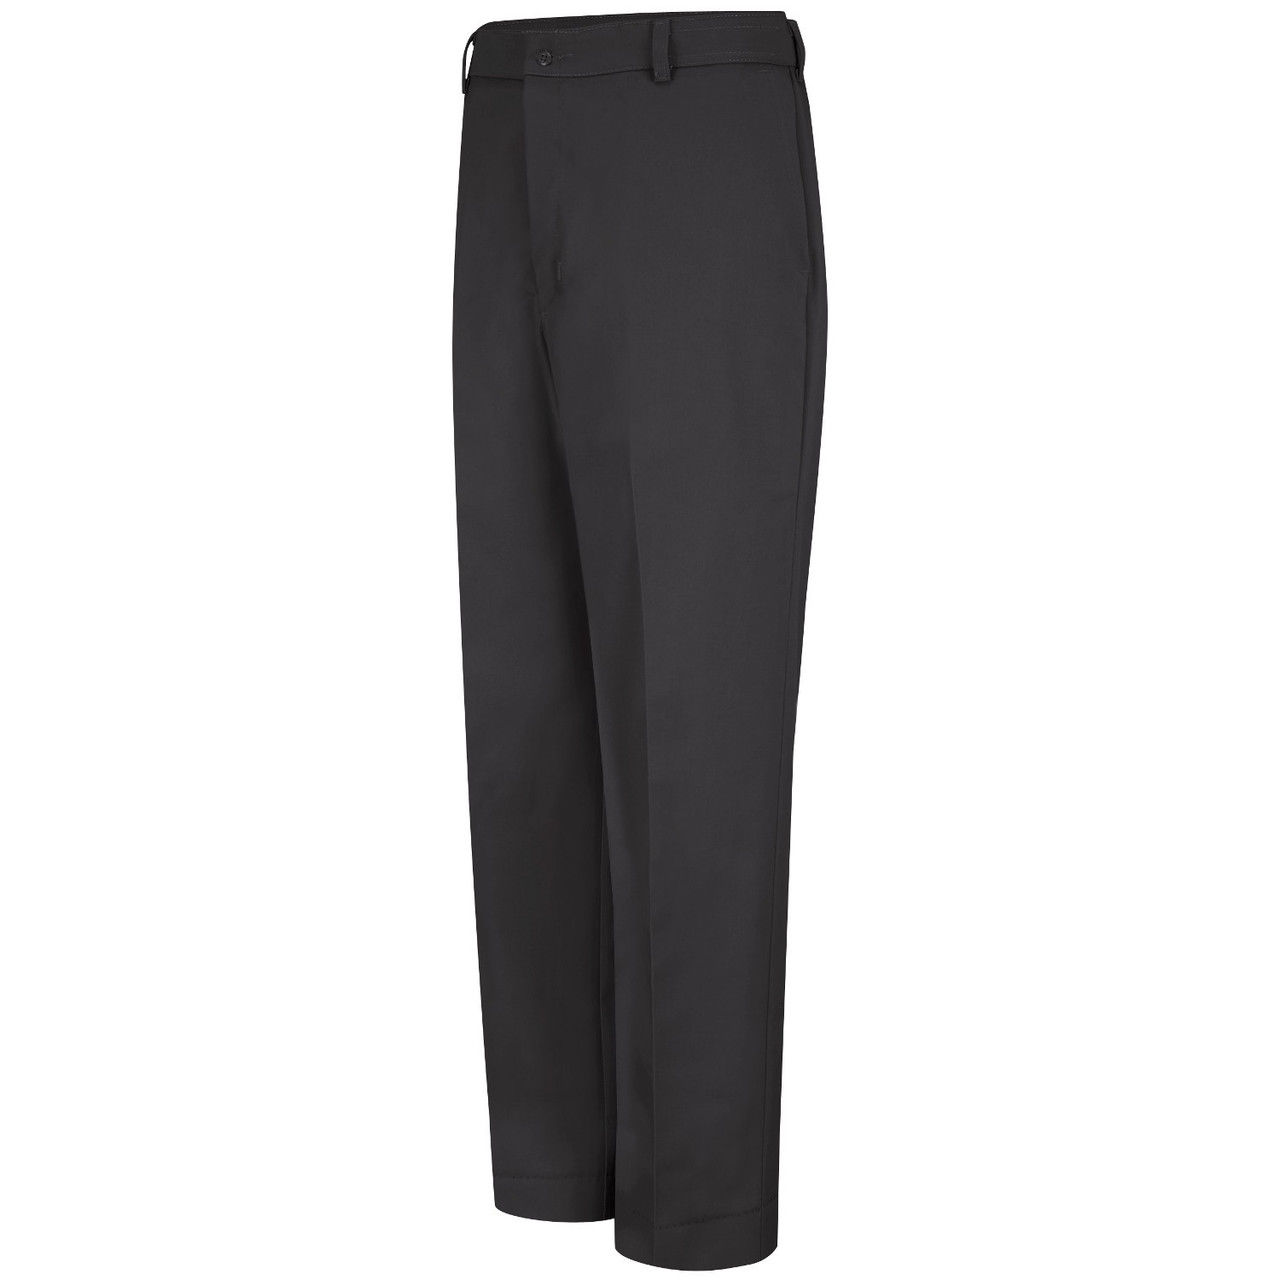 How should the Red Kap PT20 Dura-Kap Industrial Pants in Black be cared for?